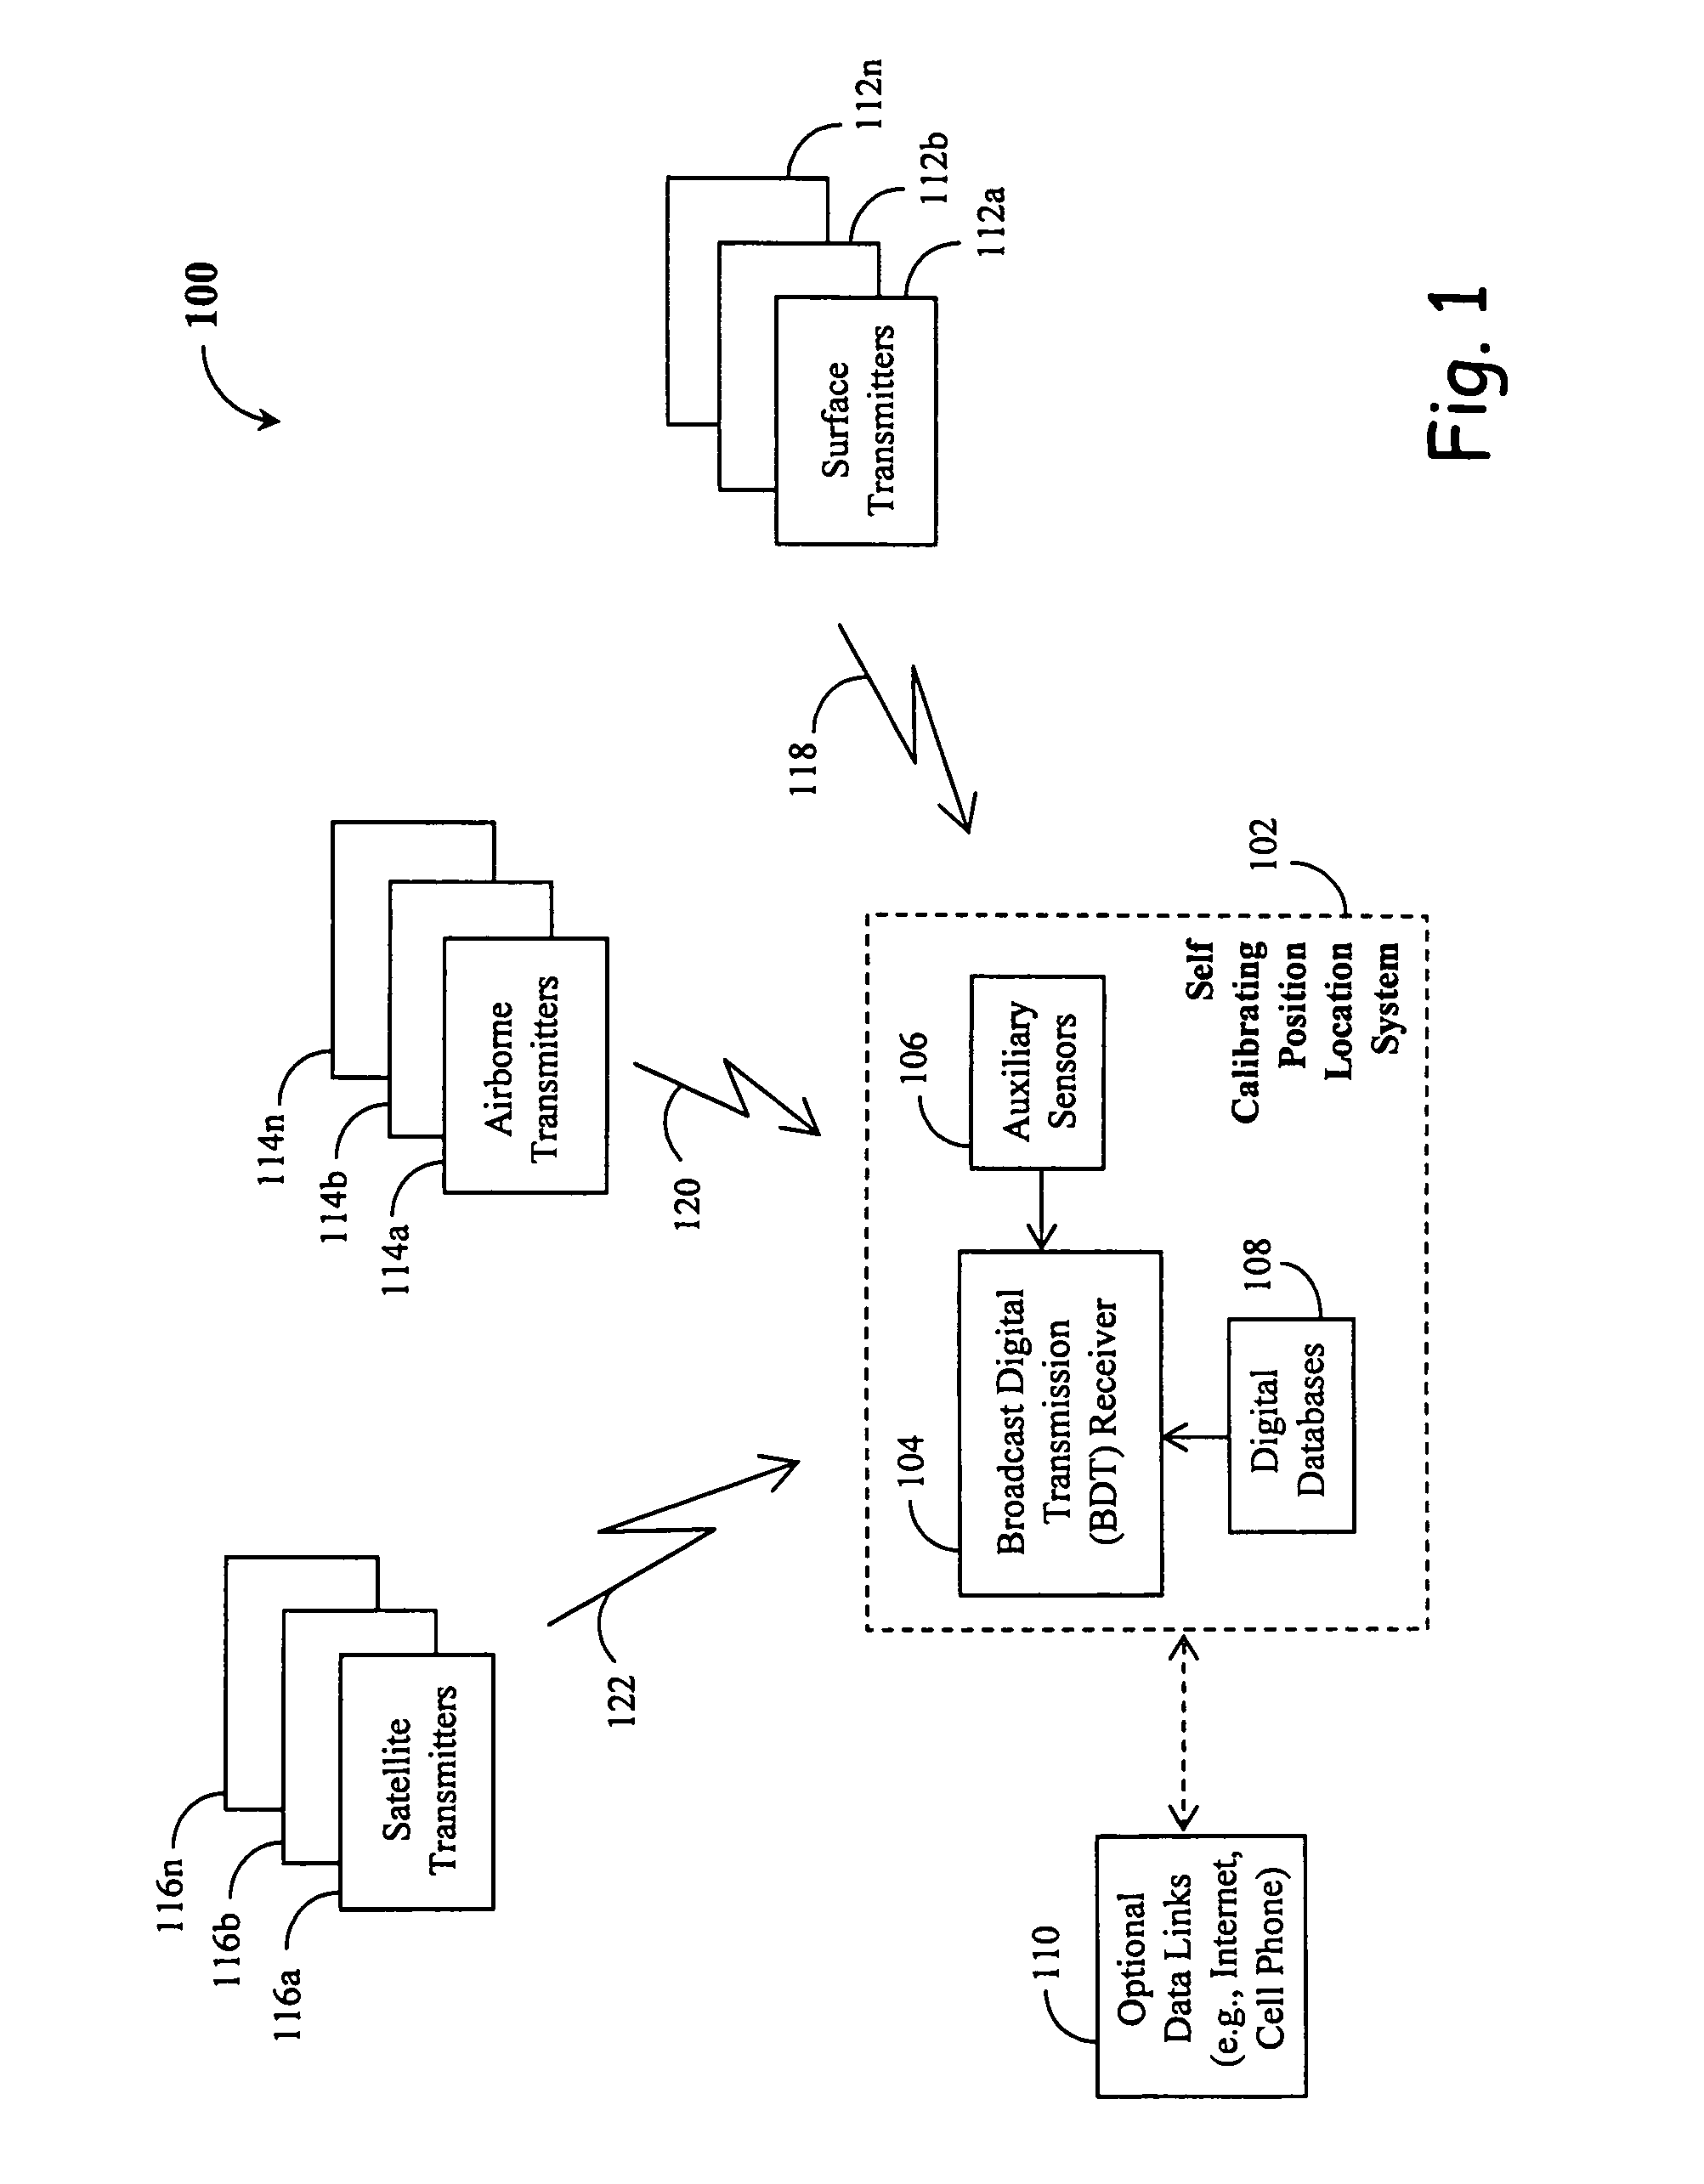 Self-calibrating position location using periodic codes in broadcast digital transmissions